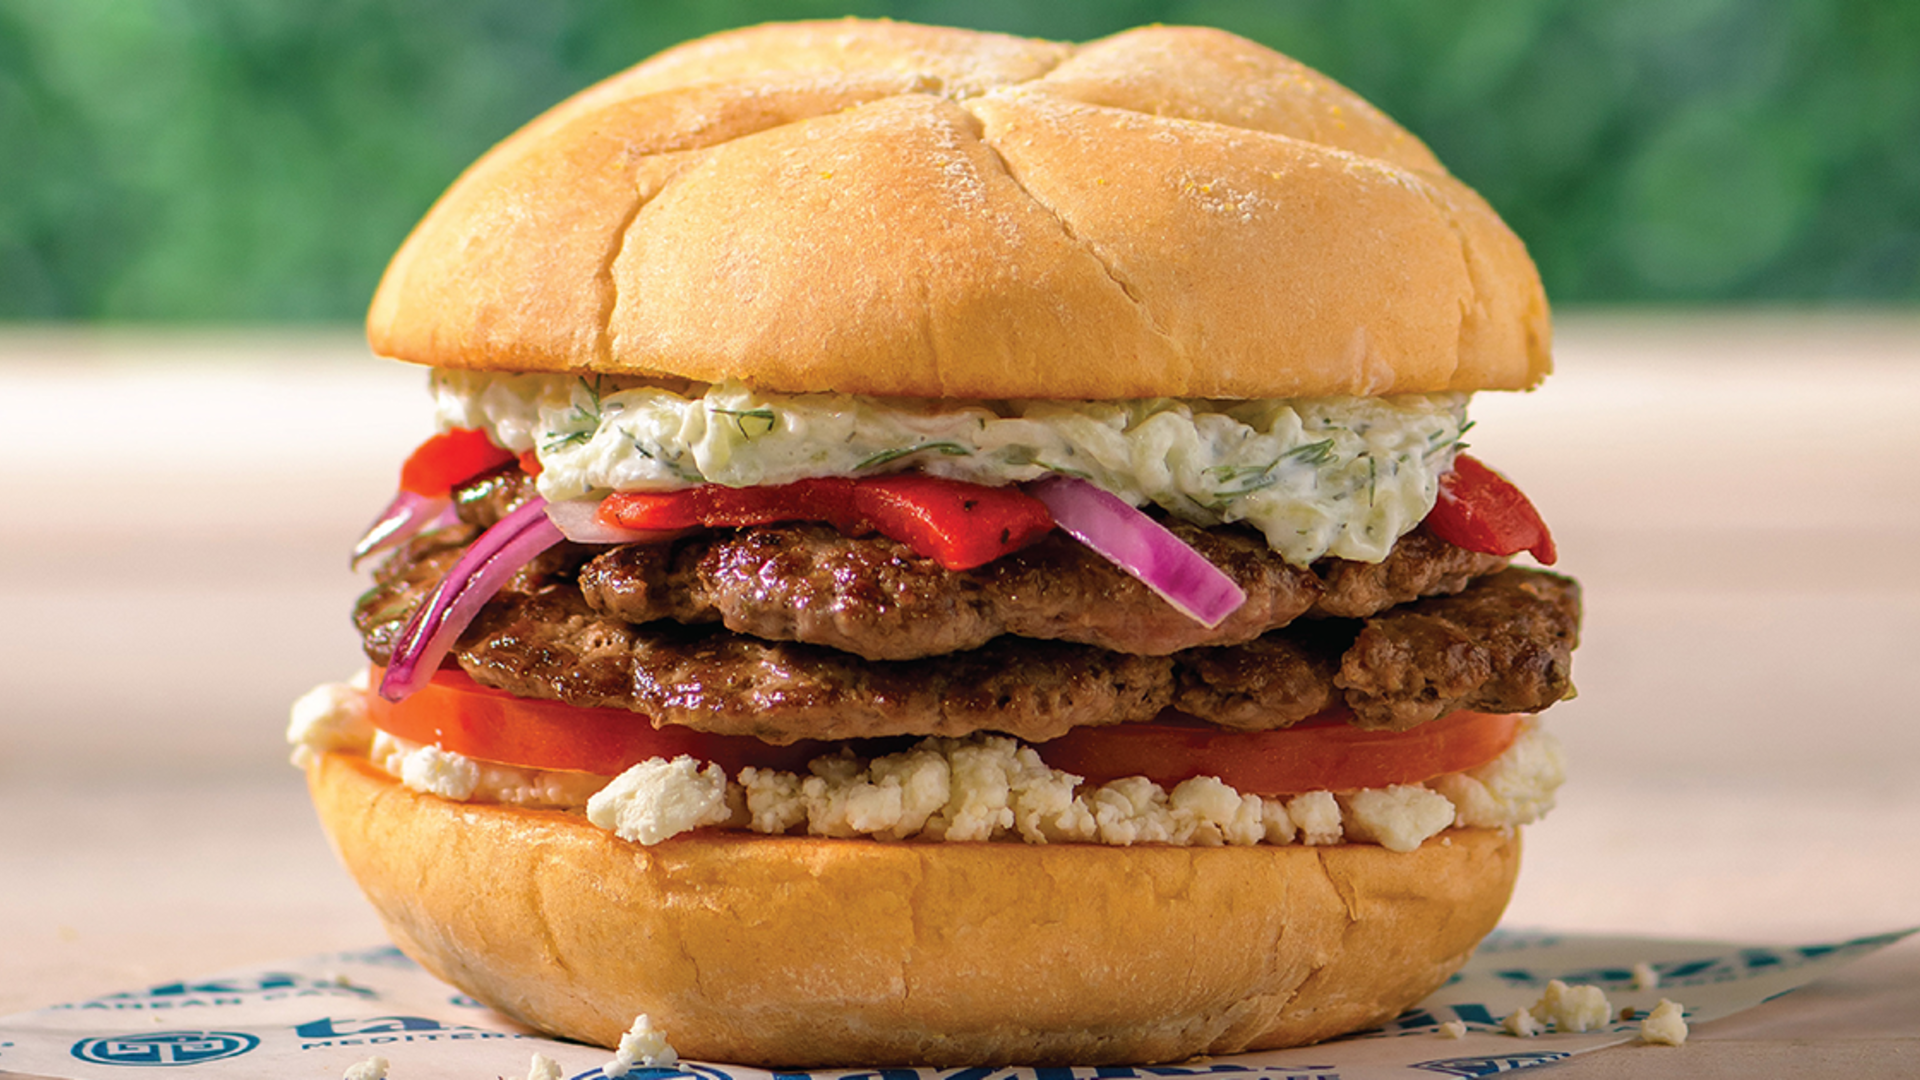 American Lamb Board Partners with Taziki’s to Launch 100% American Lamb Burger Promotion